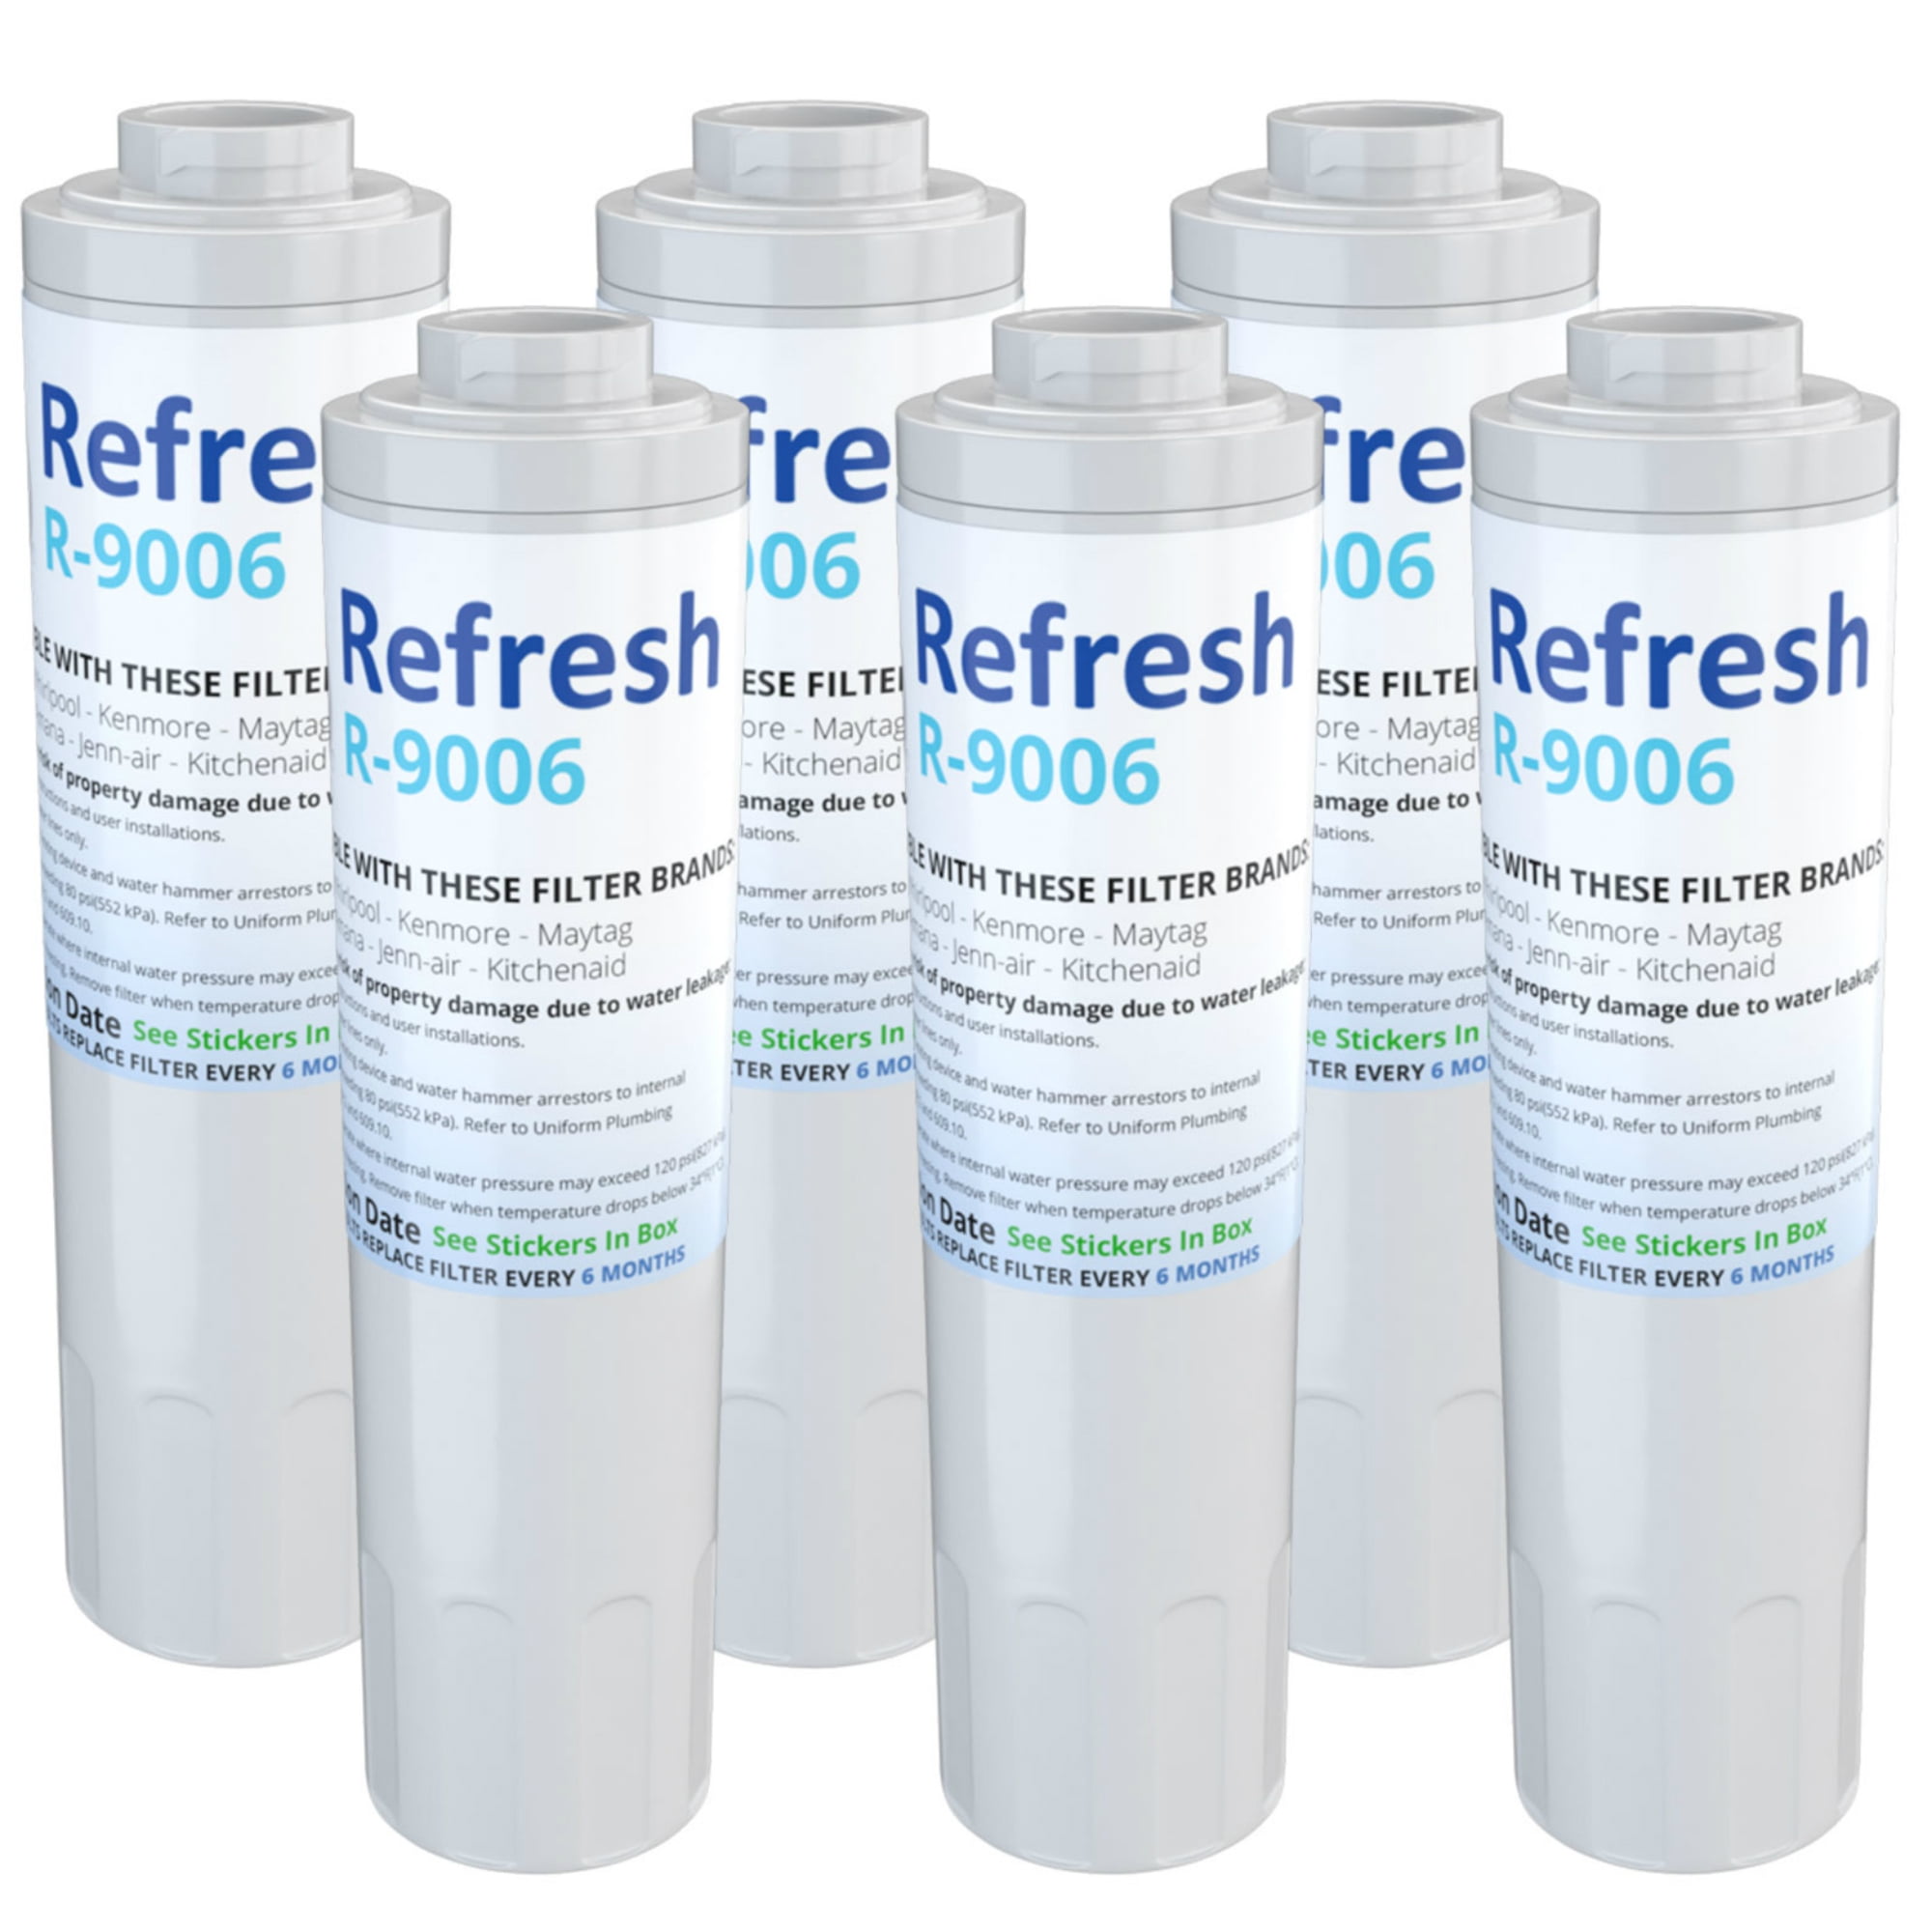 Replacement Water Filter For KitchenAid KFCS22EVBL Refrigerator Water Filter  by Aqua Fresh (3 Pack) - Bed Bath & Beyond - 21362086